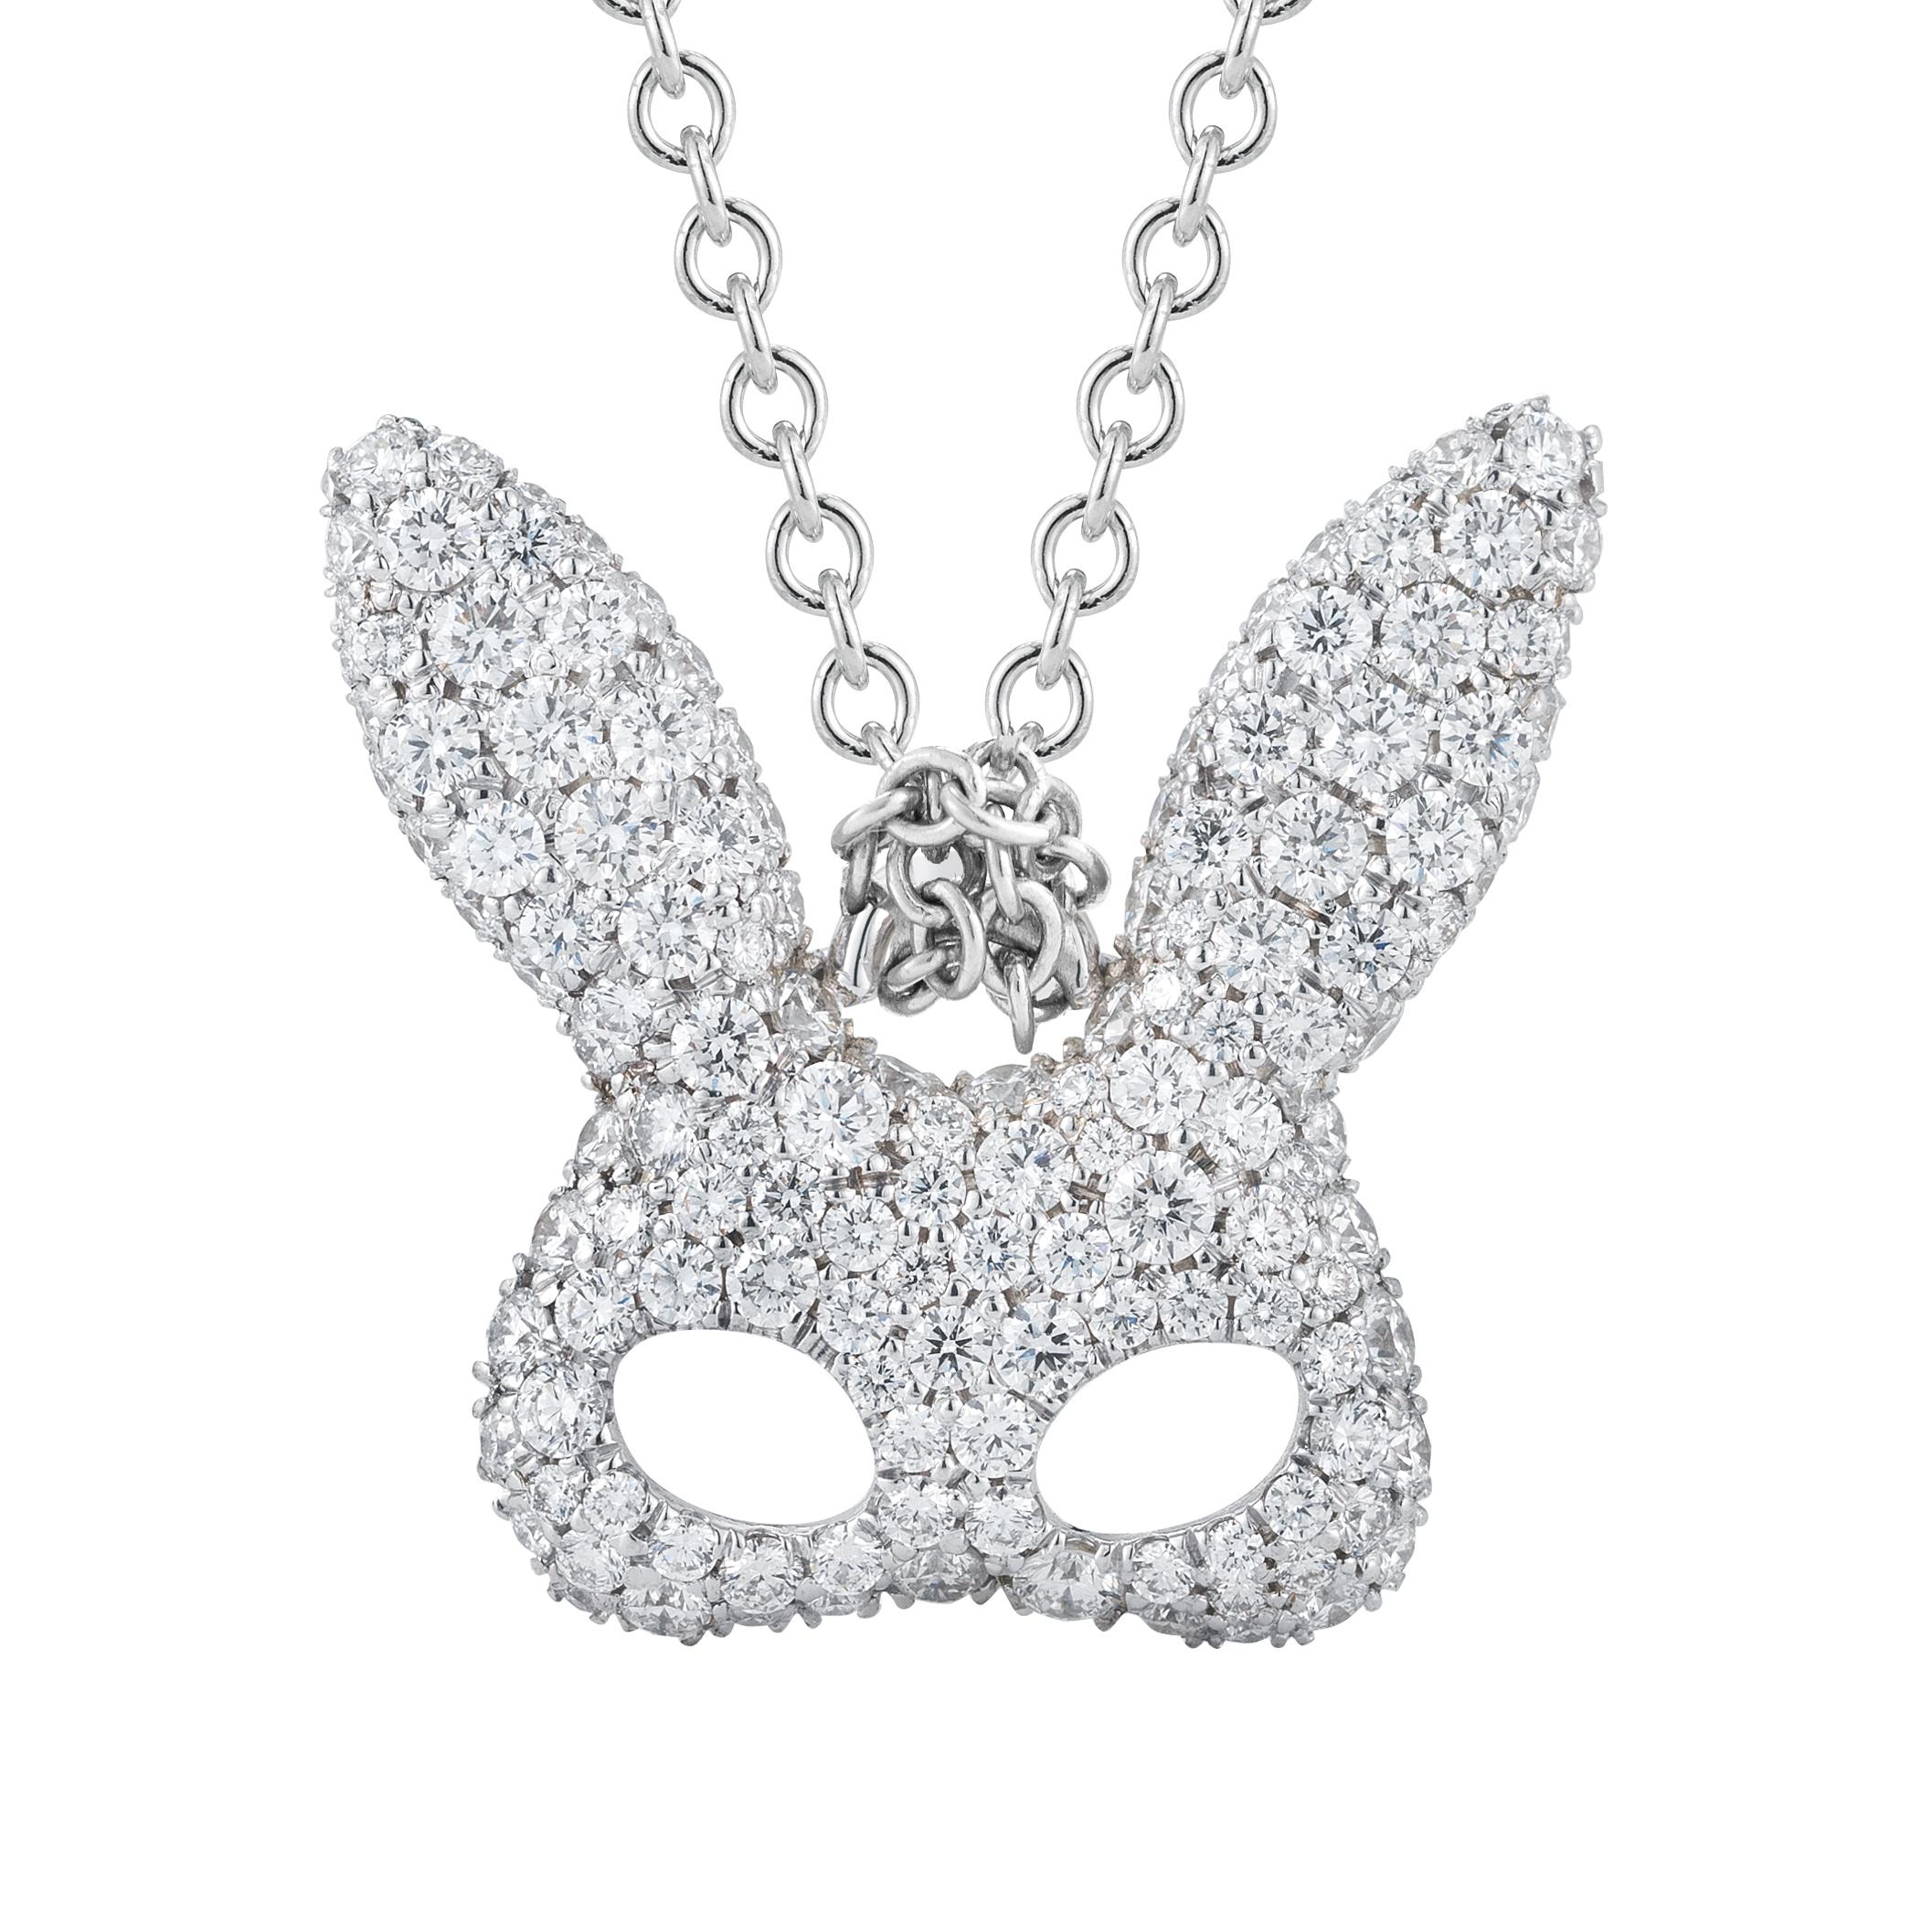 This super cute 18k white gold rabbit mask is set with mixed sized pave diamonds. The diamonds total 1.30 carats total and the pendant hangs from an 18